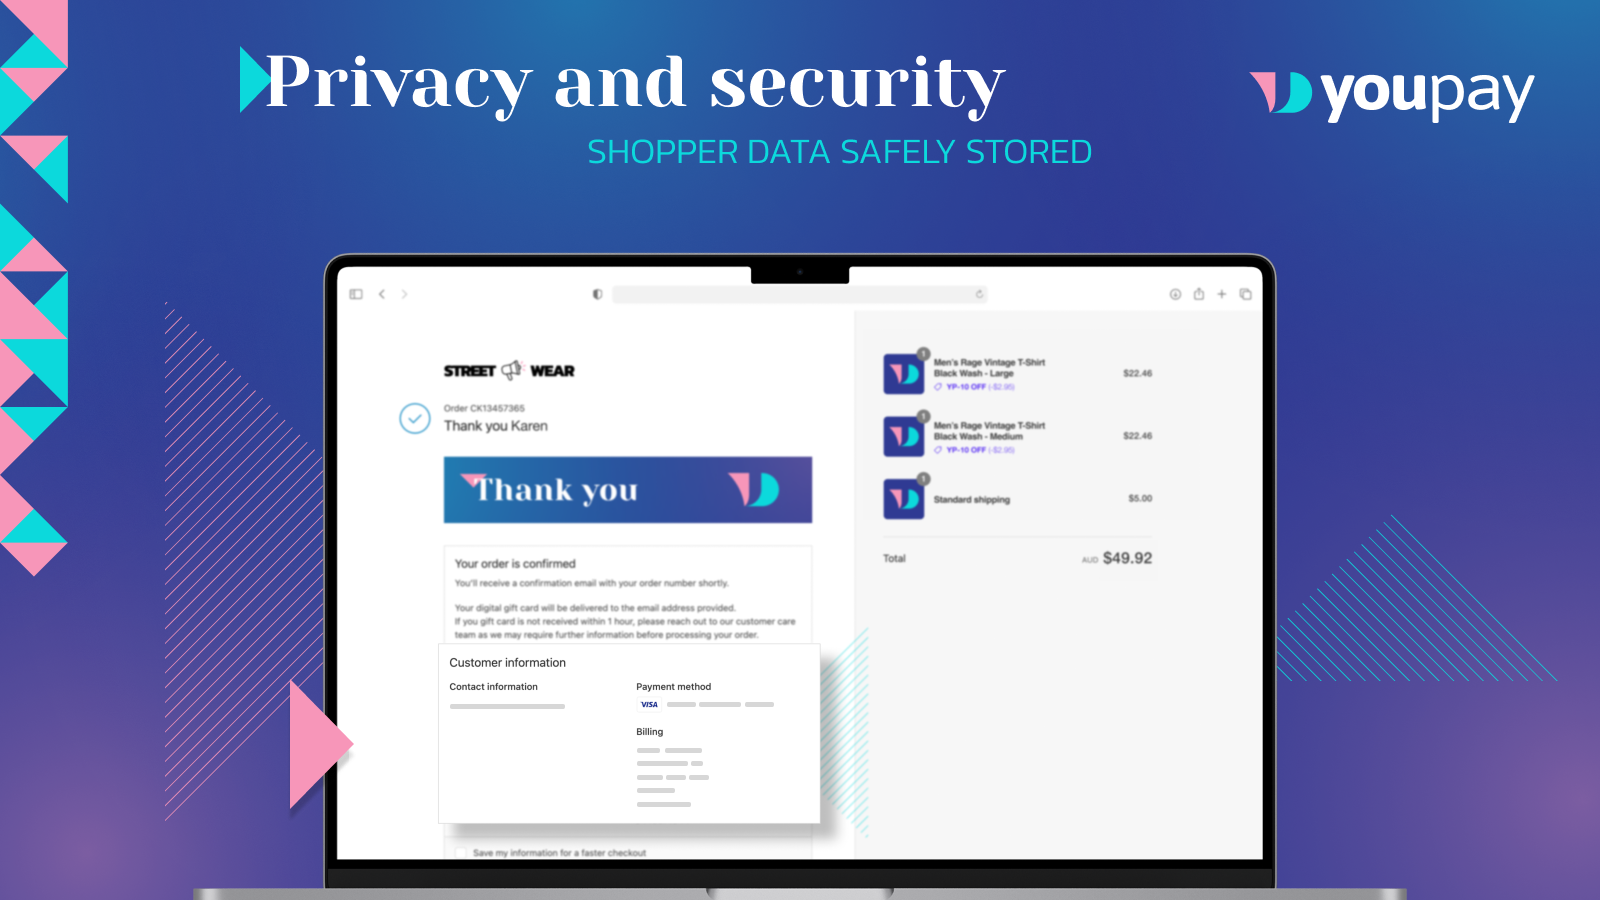 Privacy and security. Shopper data safely stored